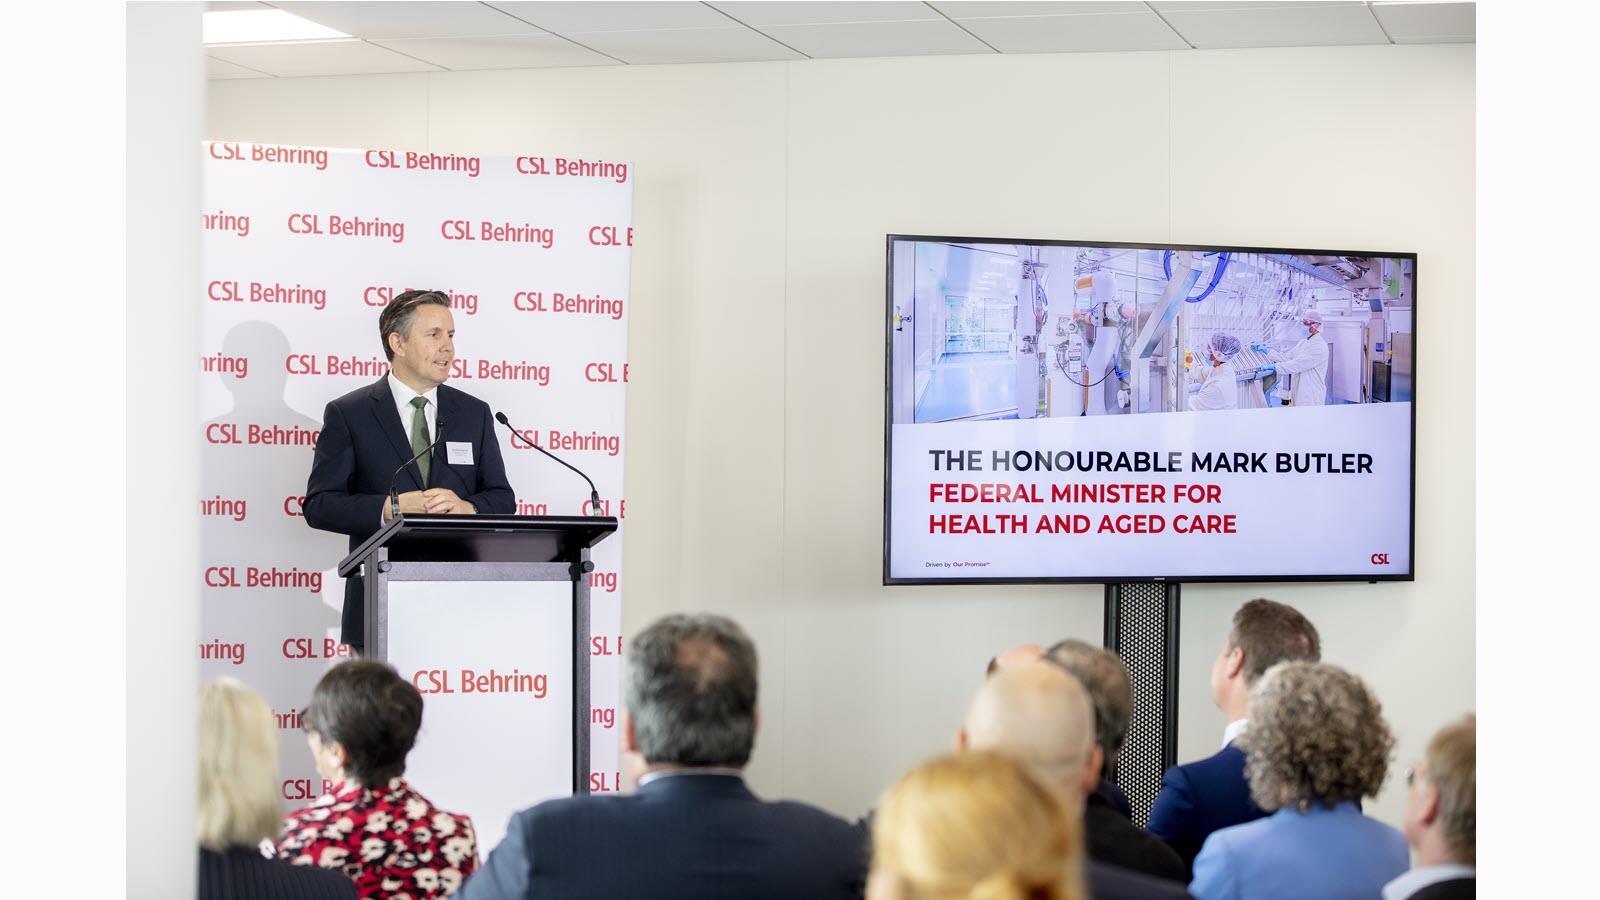 The Hon Mark Butler MP, Australia’s Minister for Health and Aged Care at the podium